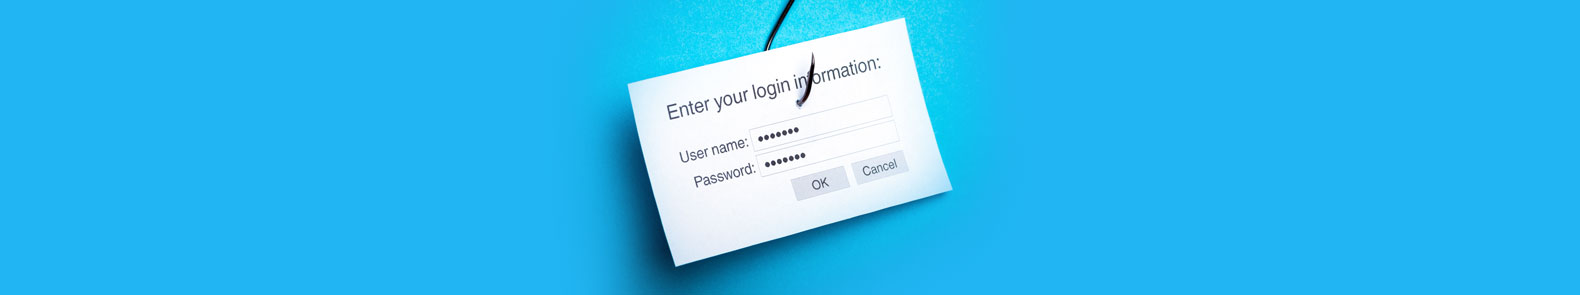 Be wary of cyber-crime (Phishing)!